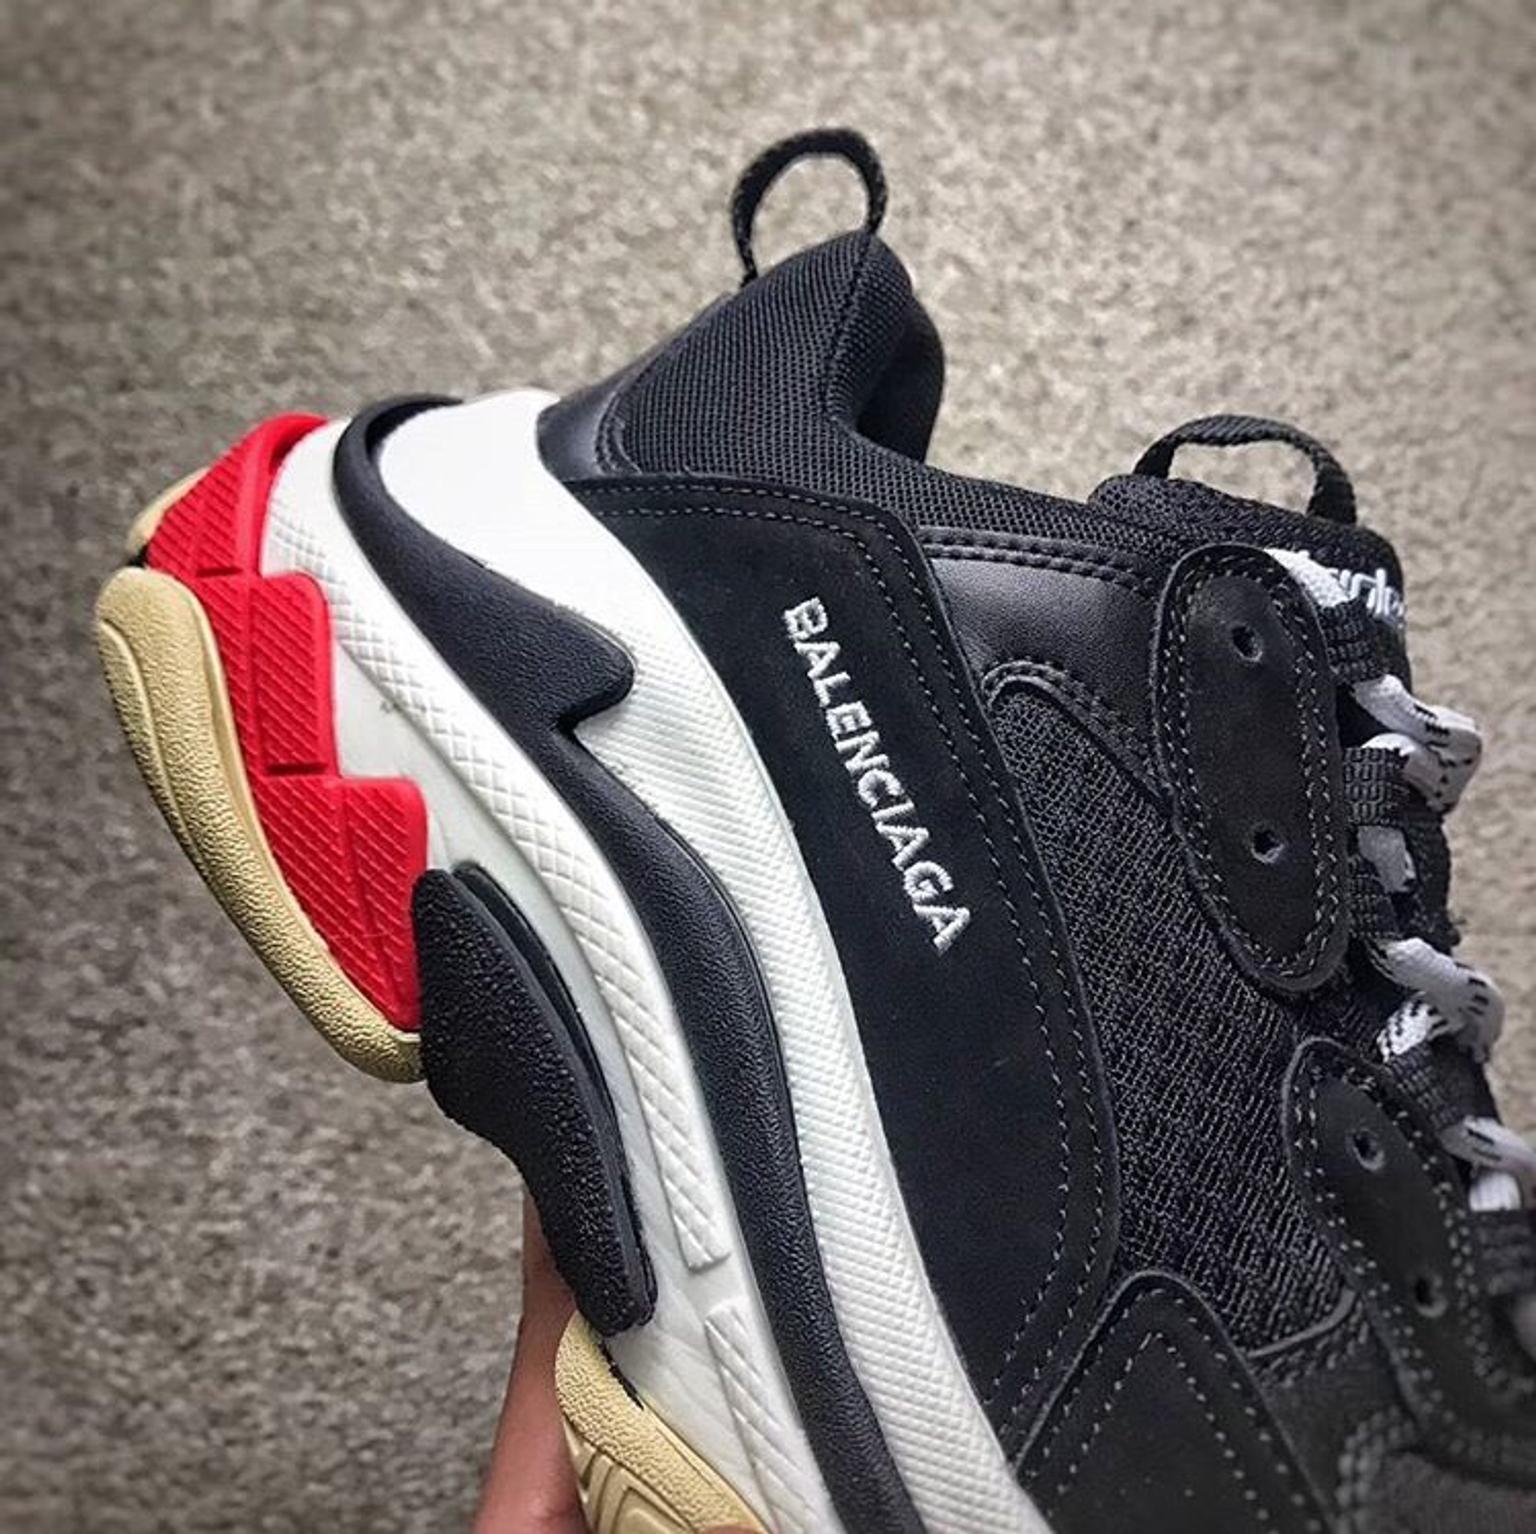 Balenciaga Triple S beige and white tone worn ONCE they